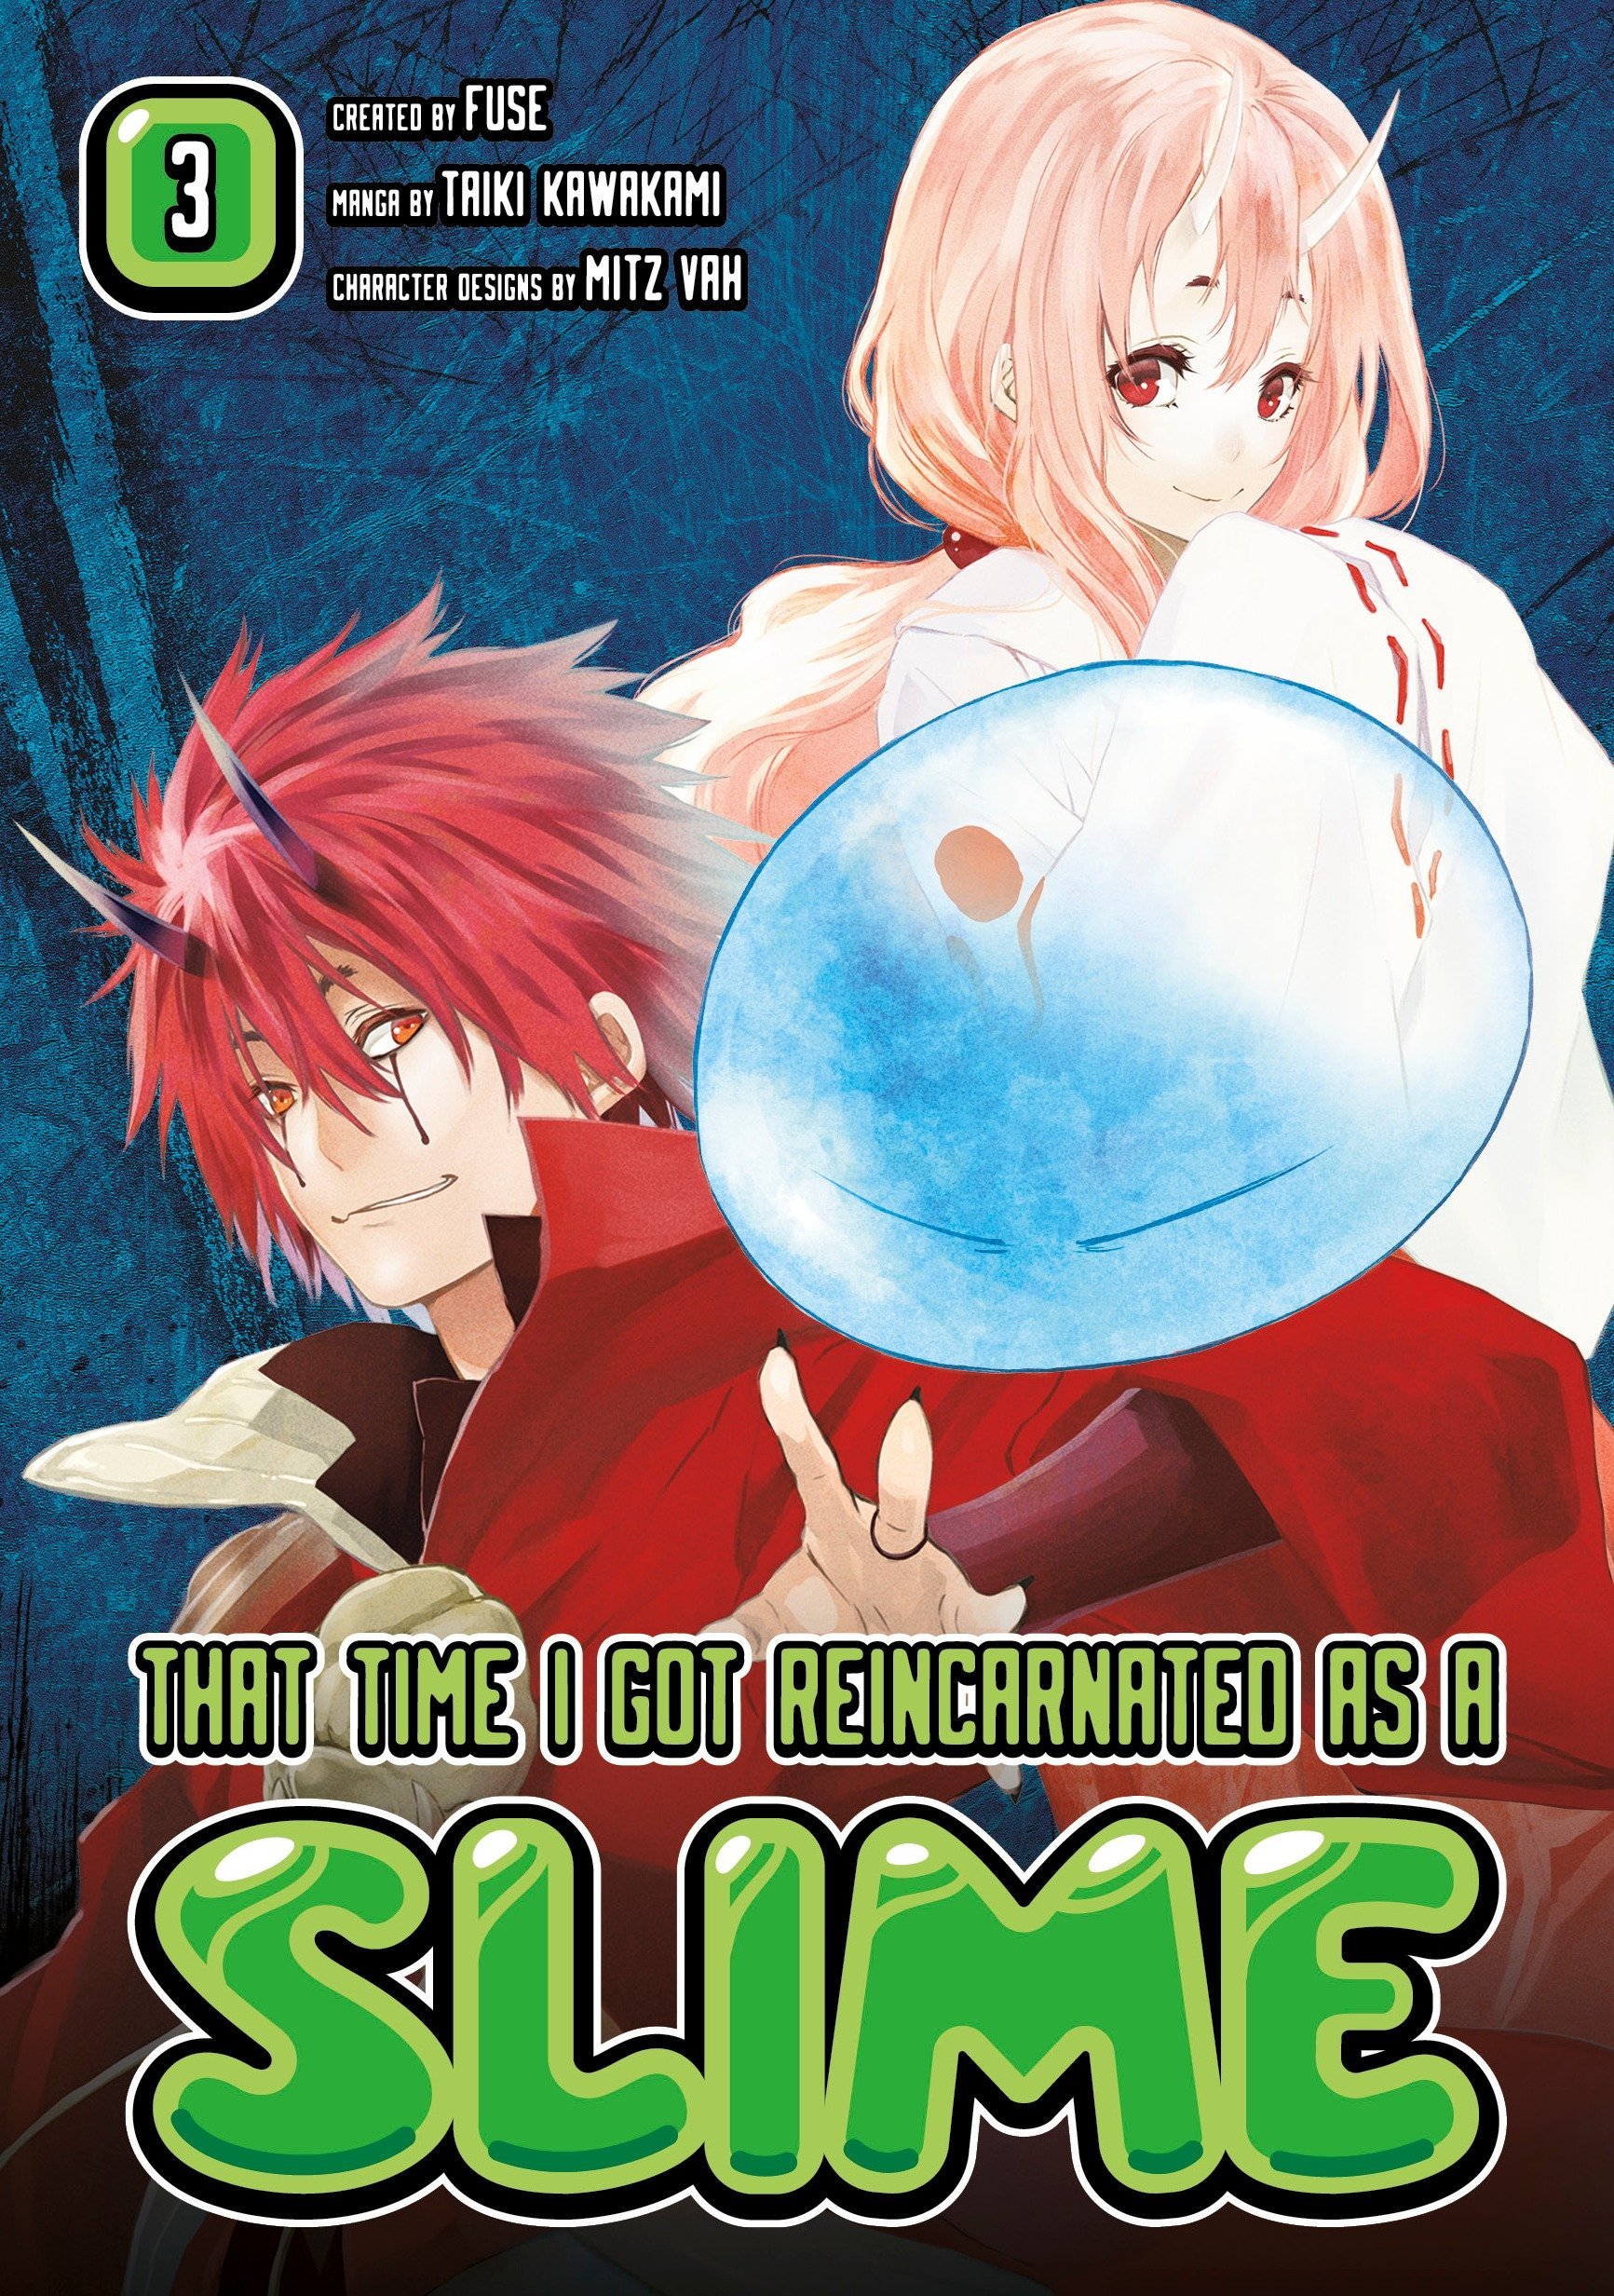 That Time I Got Reincarnated as a Slime - Volume 3 | Fuse